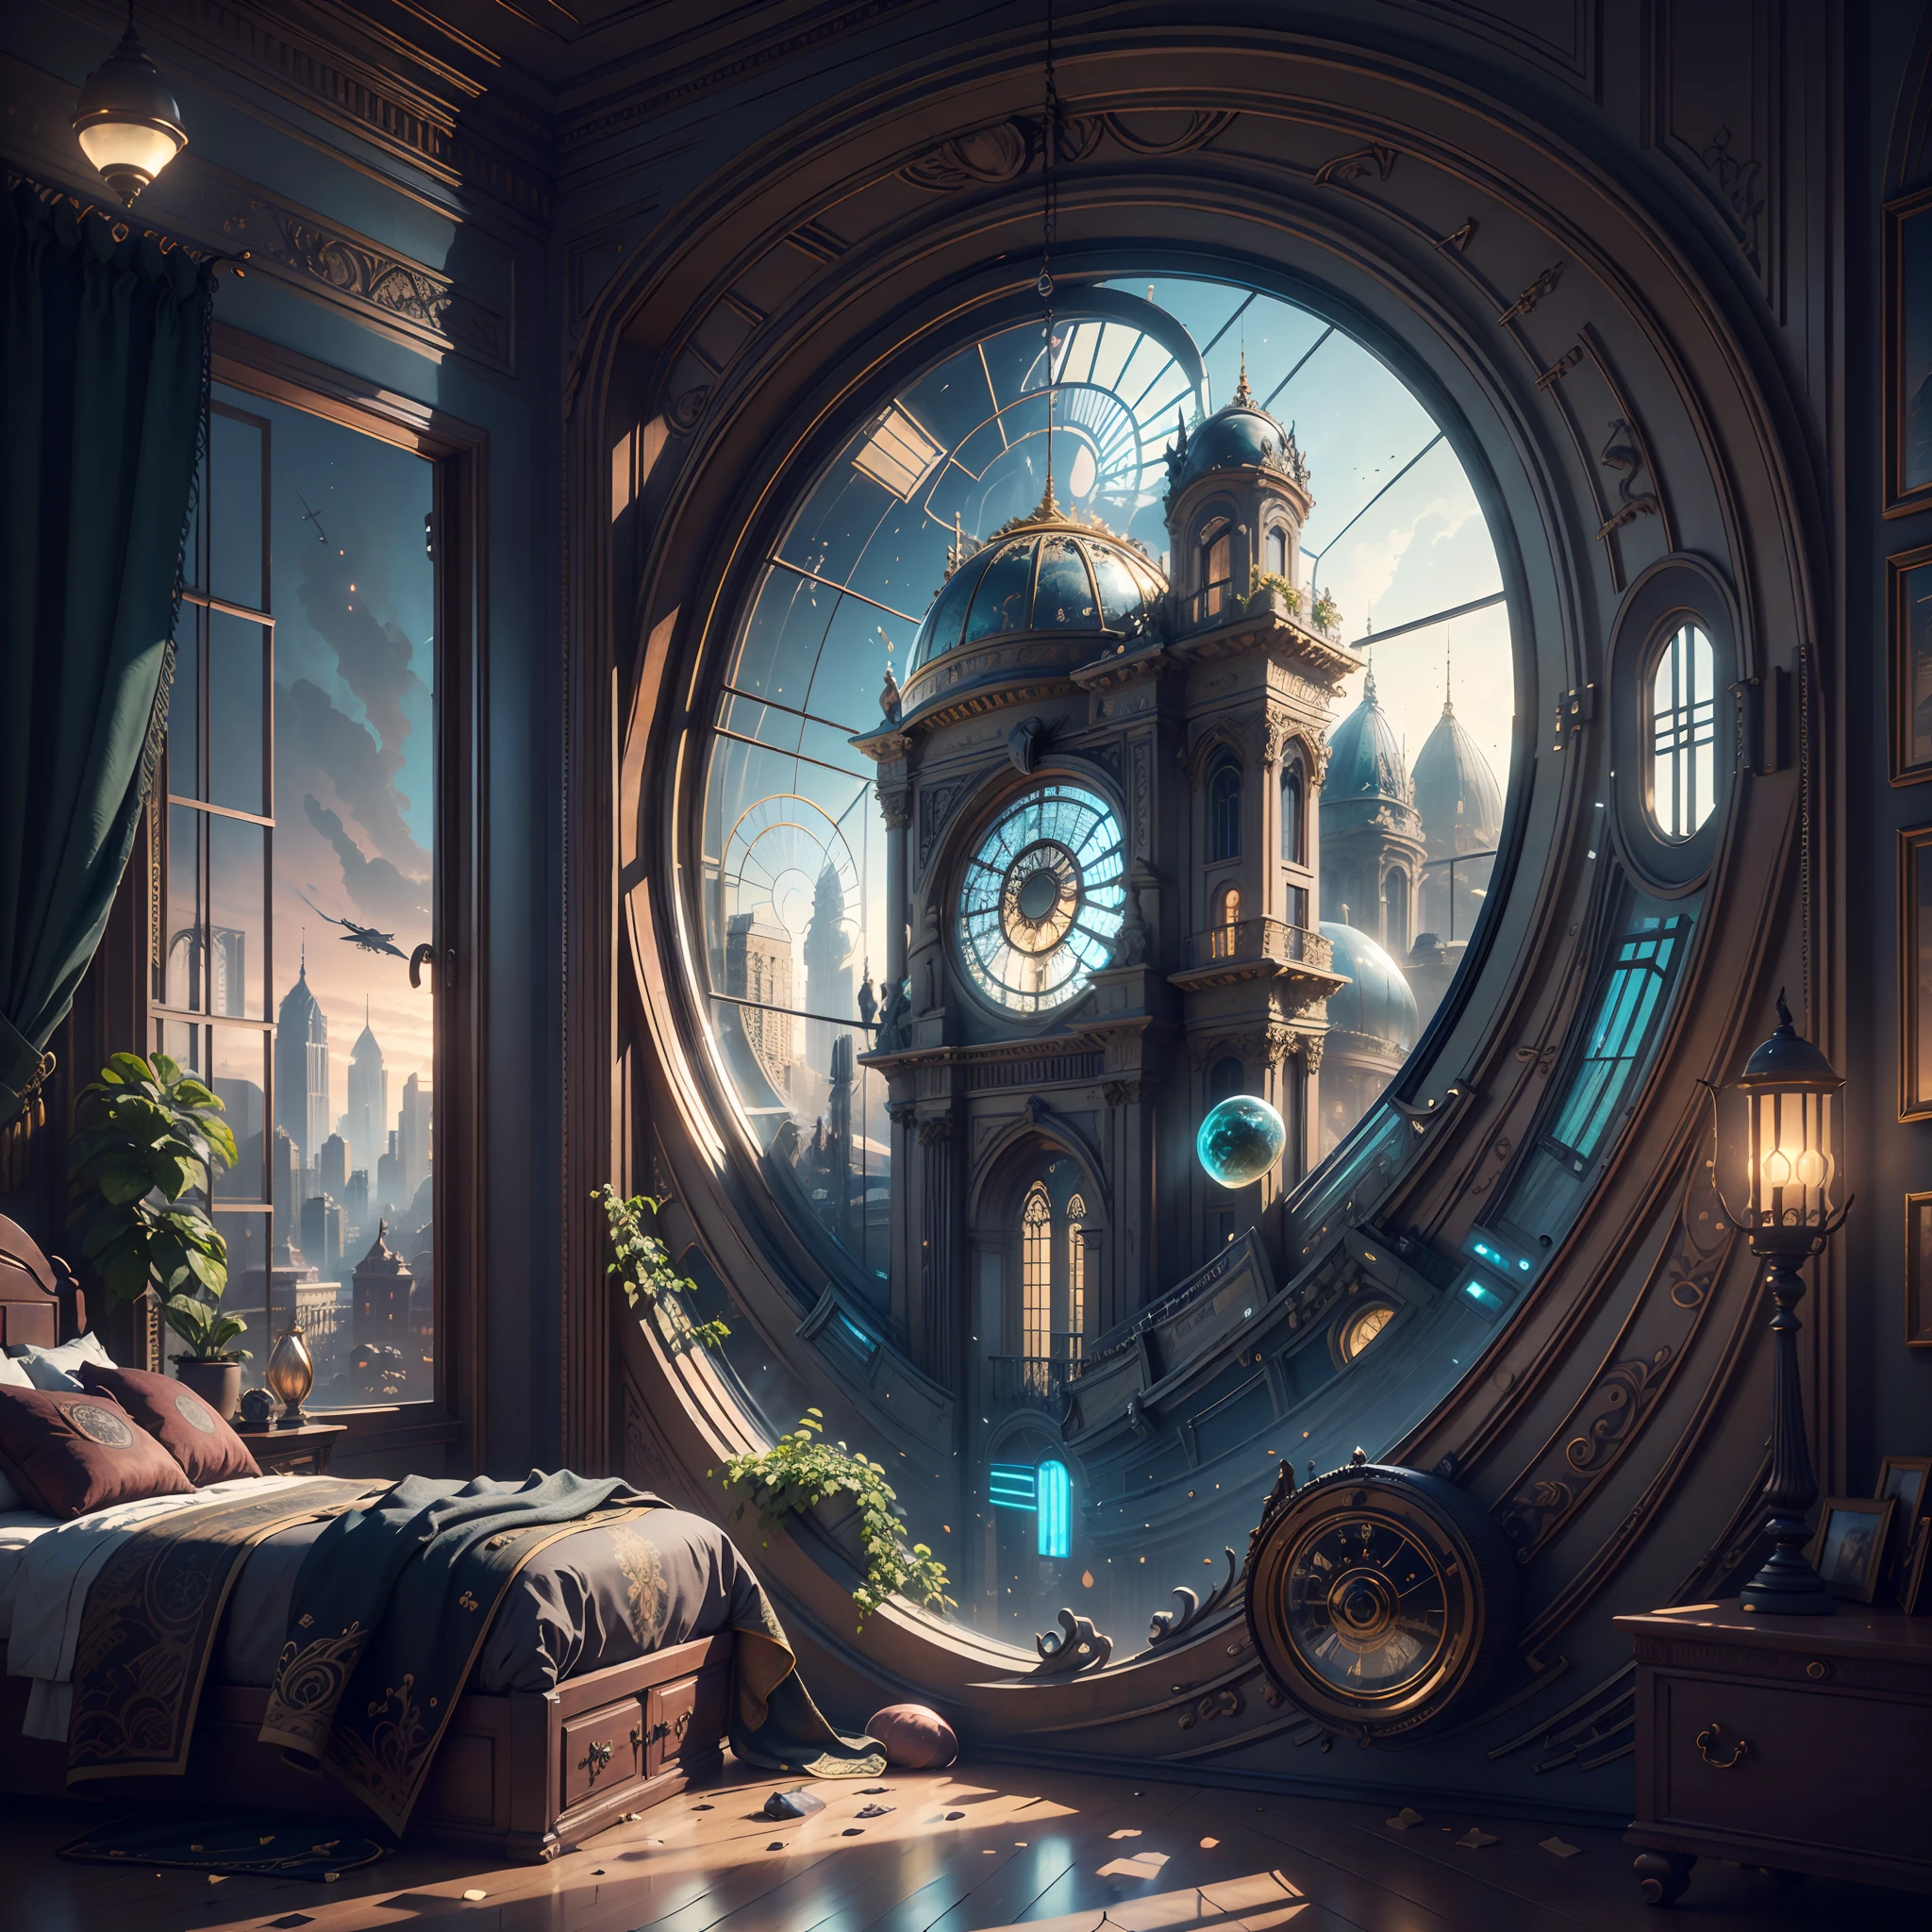 (((Generate an ornate bedroom in the style of Versailles with a big historical window.))) A hyperrealistic cyberpunk dreamscape cityscape is in the window. The cityscape is extremely detailed with many lights and LED neon colors and buildings of many different sizes. The cityscape has all colors of the rainbow and has hires interesting flying steampunk dirigibles. A giant steampunk standalone clock is seen ((through the window)). It is peaceful in the bedroom. The entire artwork is very realistic with many small details and enhancements. 3D render beeple, artstation and beeple highly, in fantasy sci-fi city, inspired by beeple, 8k, unreal engine unity CGI. Masterpiece and popular. Add many fantastical and beautiful details and nuances.